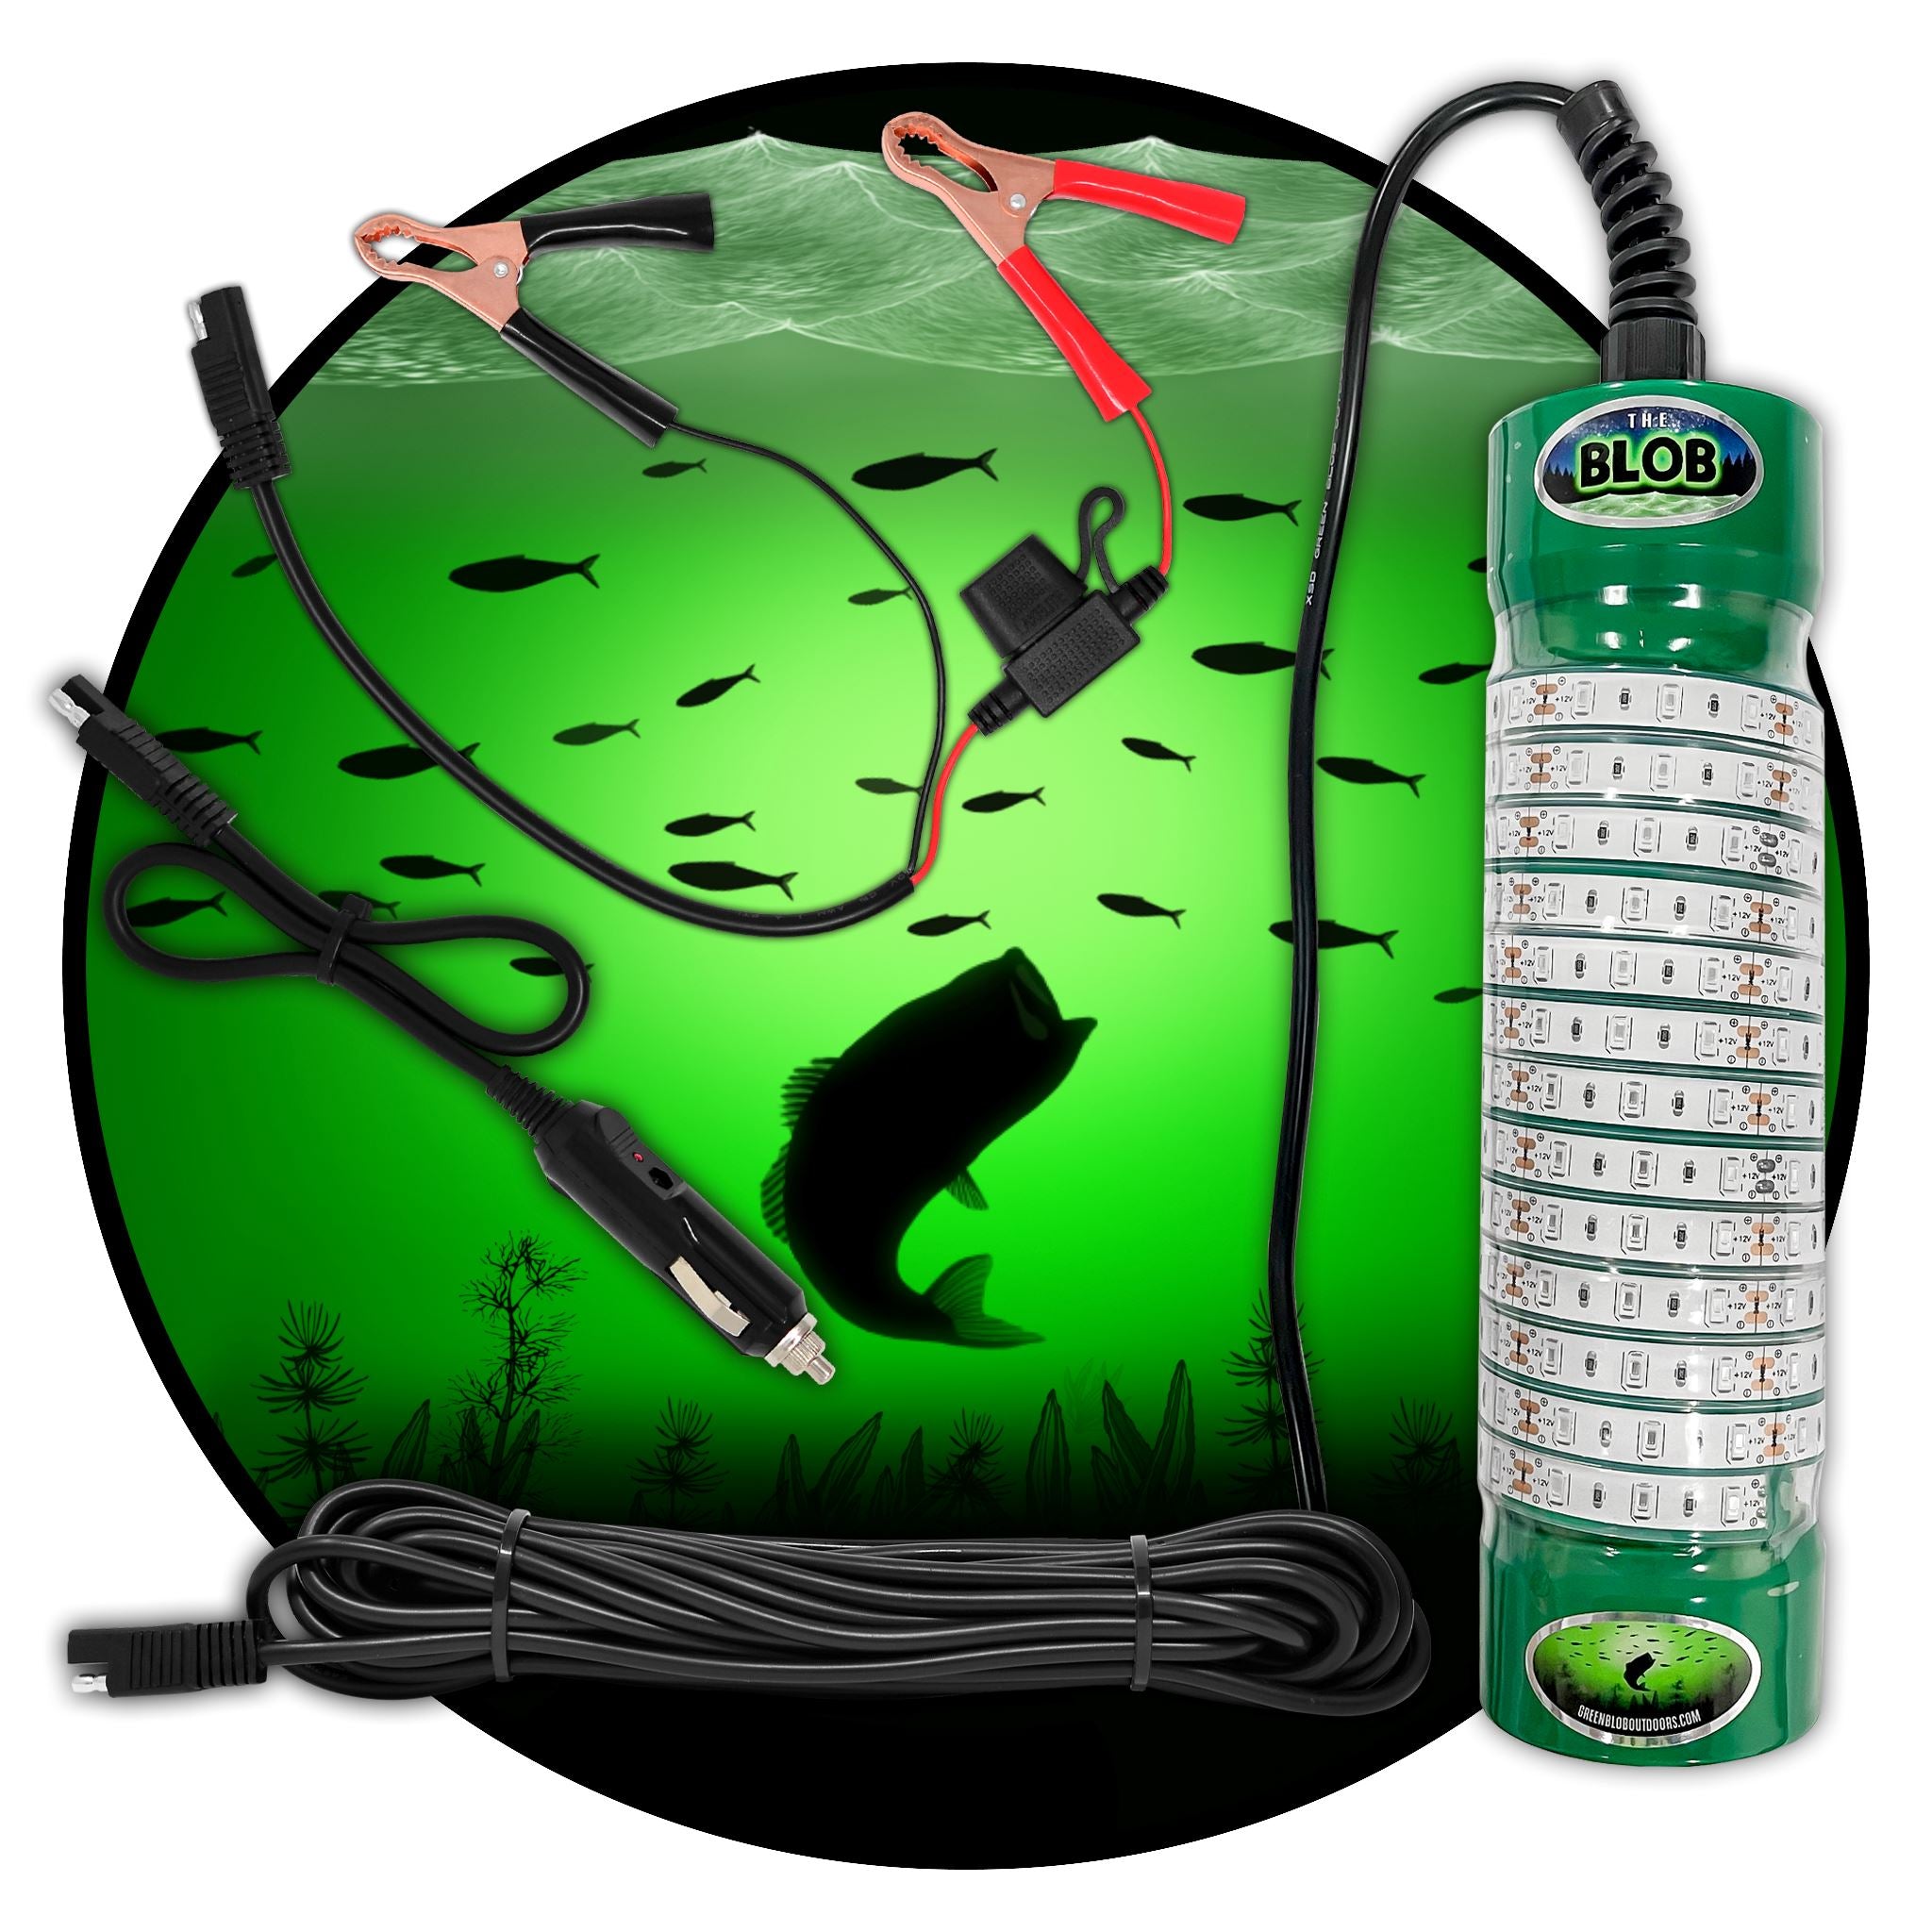 20W LED Underwater Pickerel Fishing Lamp For Boat Squid Blue, Green, And  White Light With Attractable Pickerel Fish Bait Finder From Htoutdoor,  $18.15